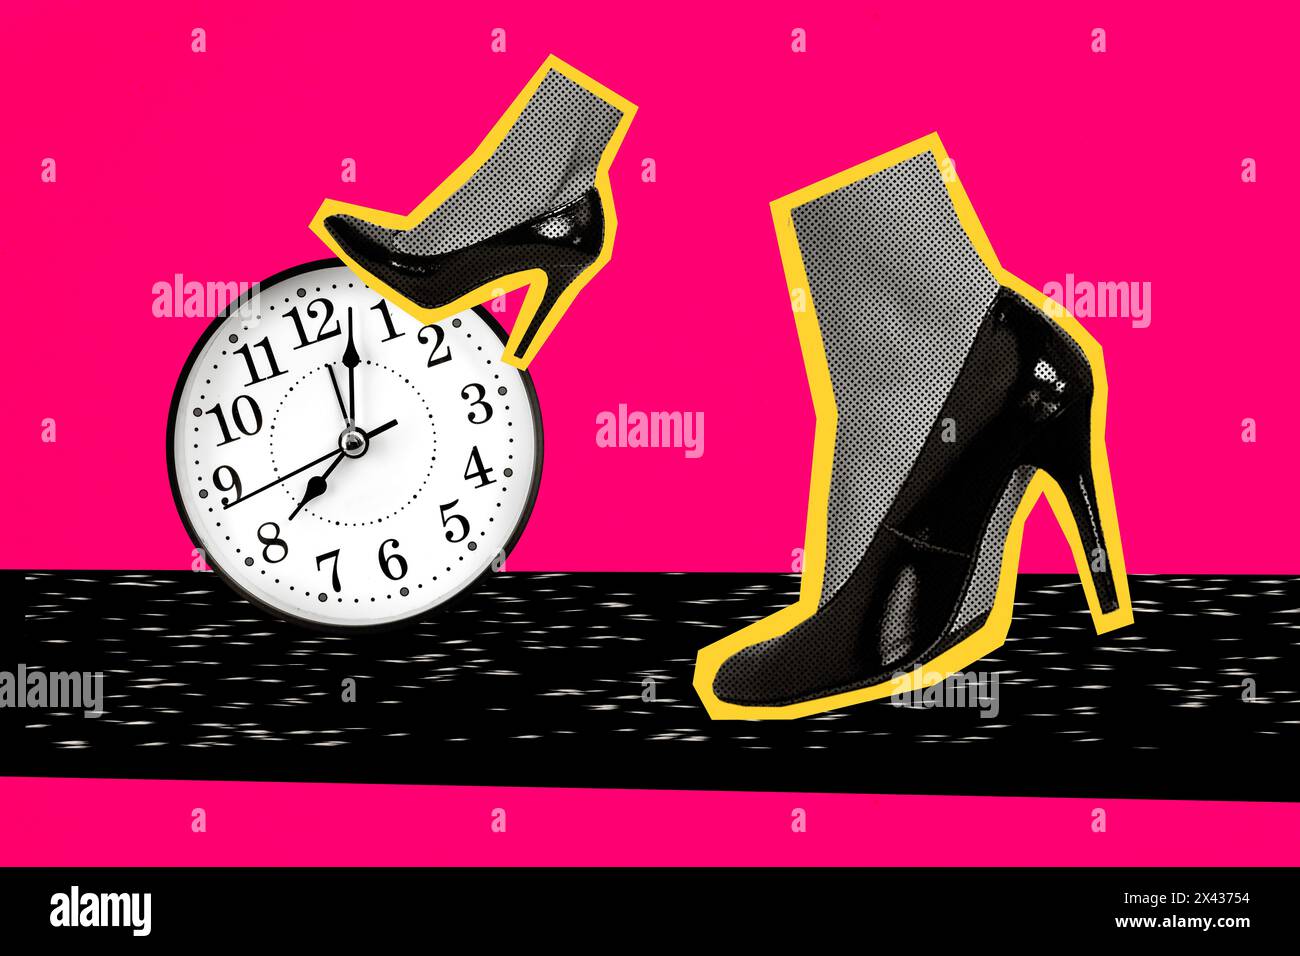 Sketch image composite trend artwork photo collage of two woman fashion style legs wear high heels walk step on huge clock show time Stock Photo